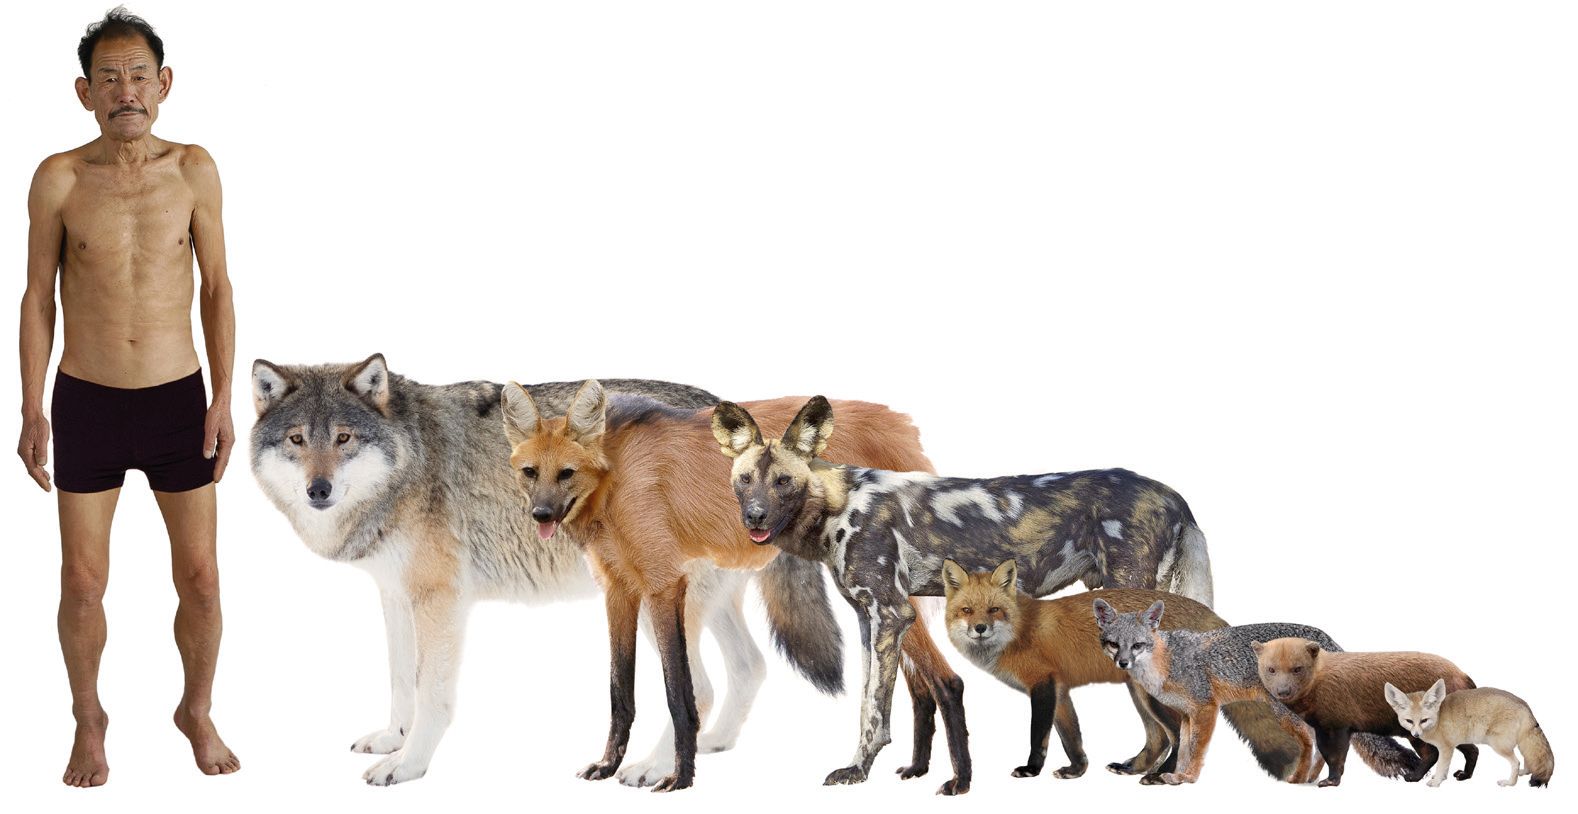 Variety of size and body shape in Canids.jpg